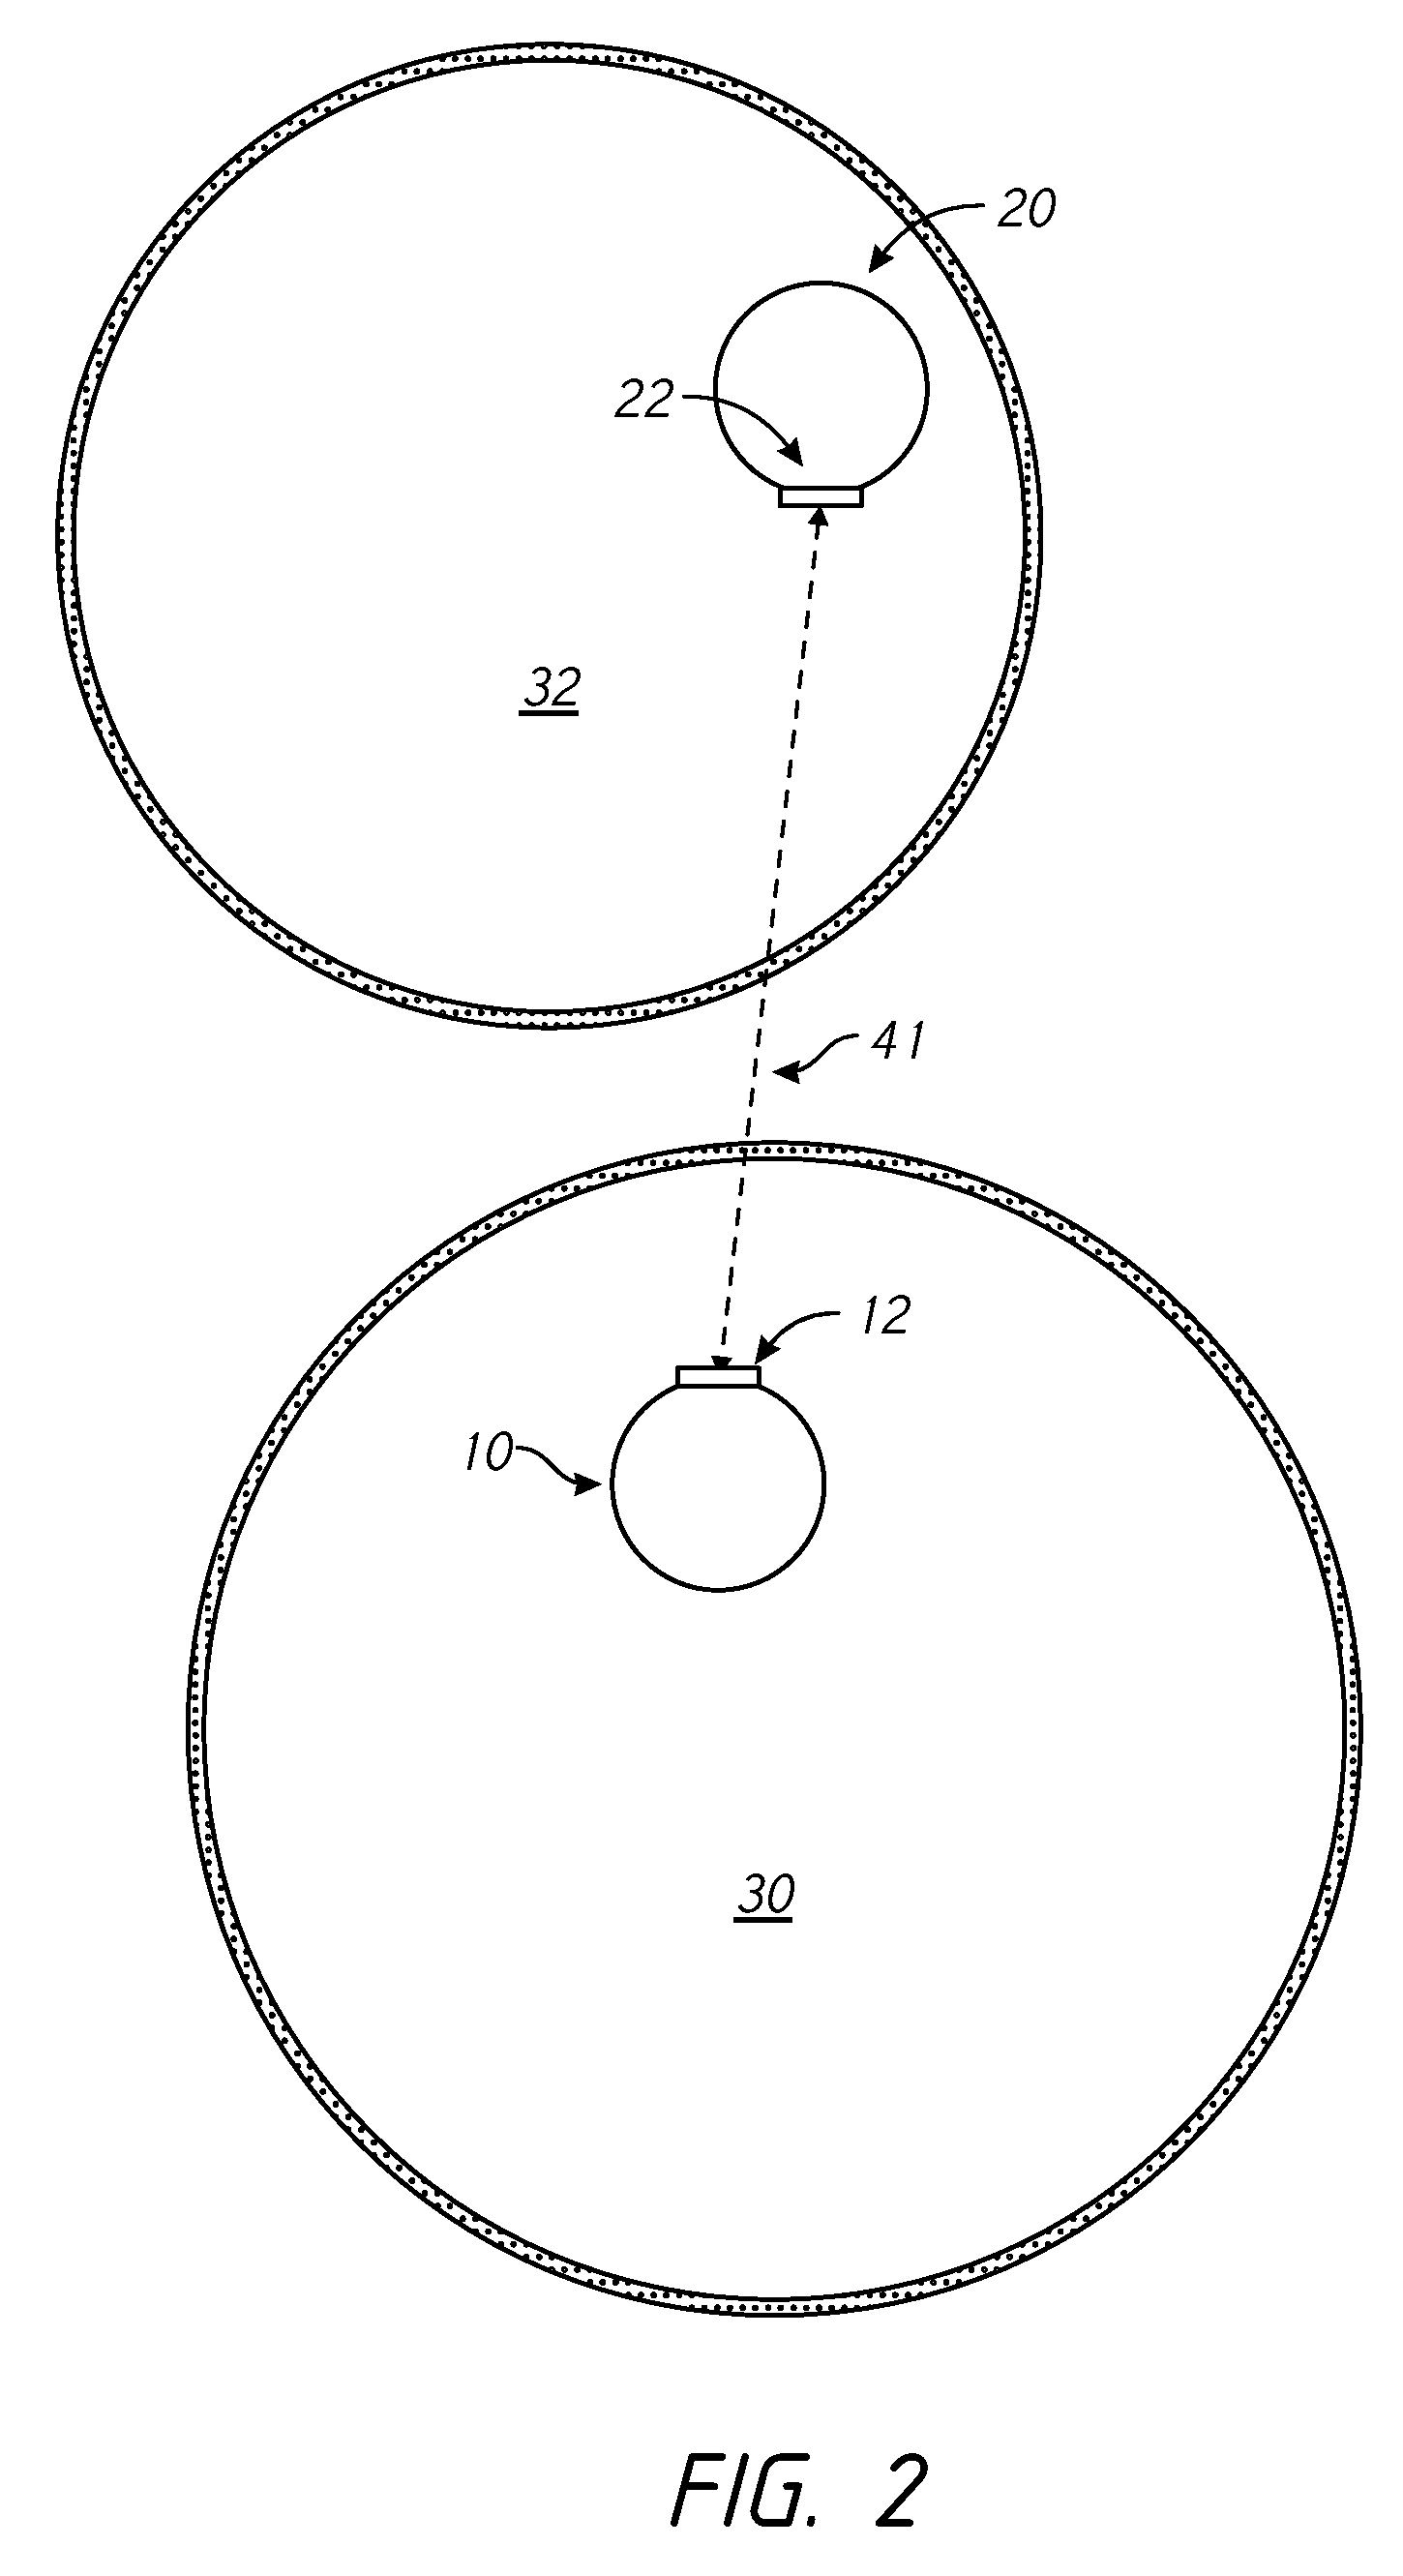 Methods and systems for providing or maintaining fluid flow through body passages